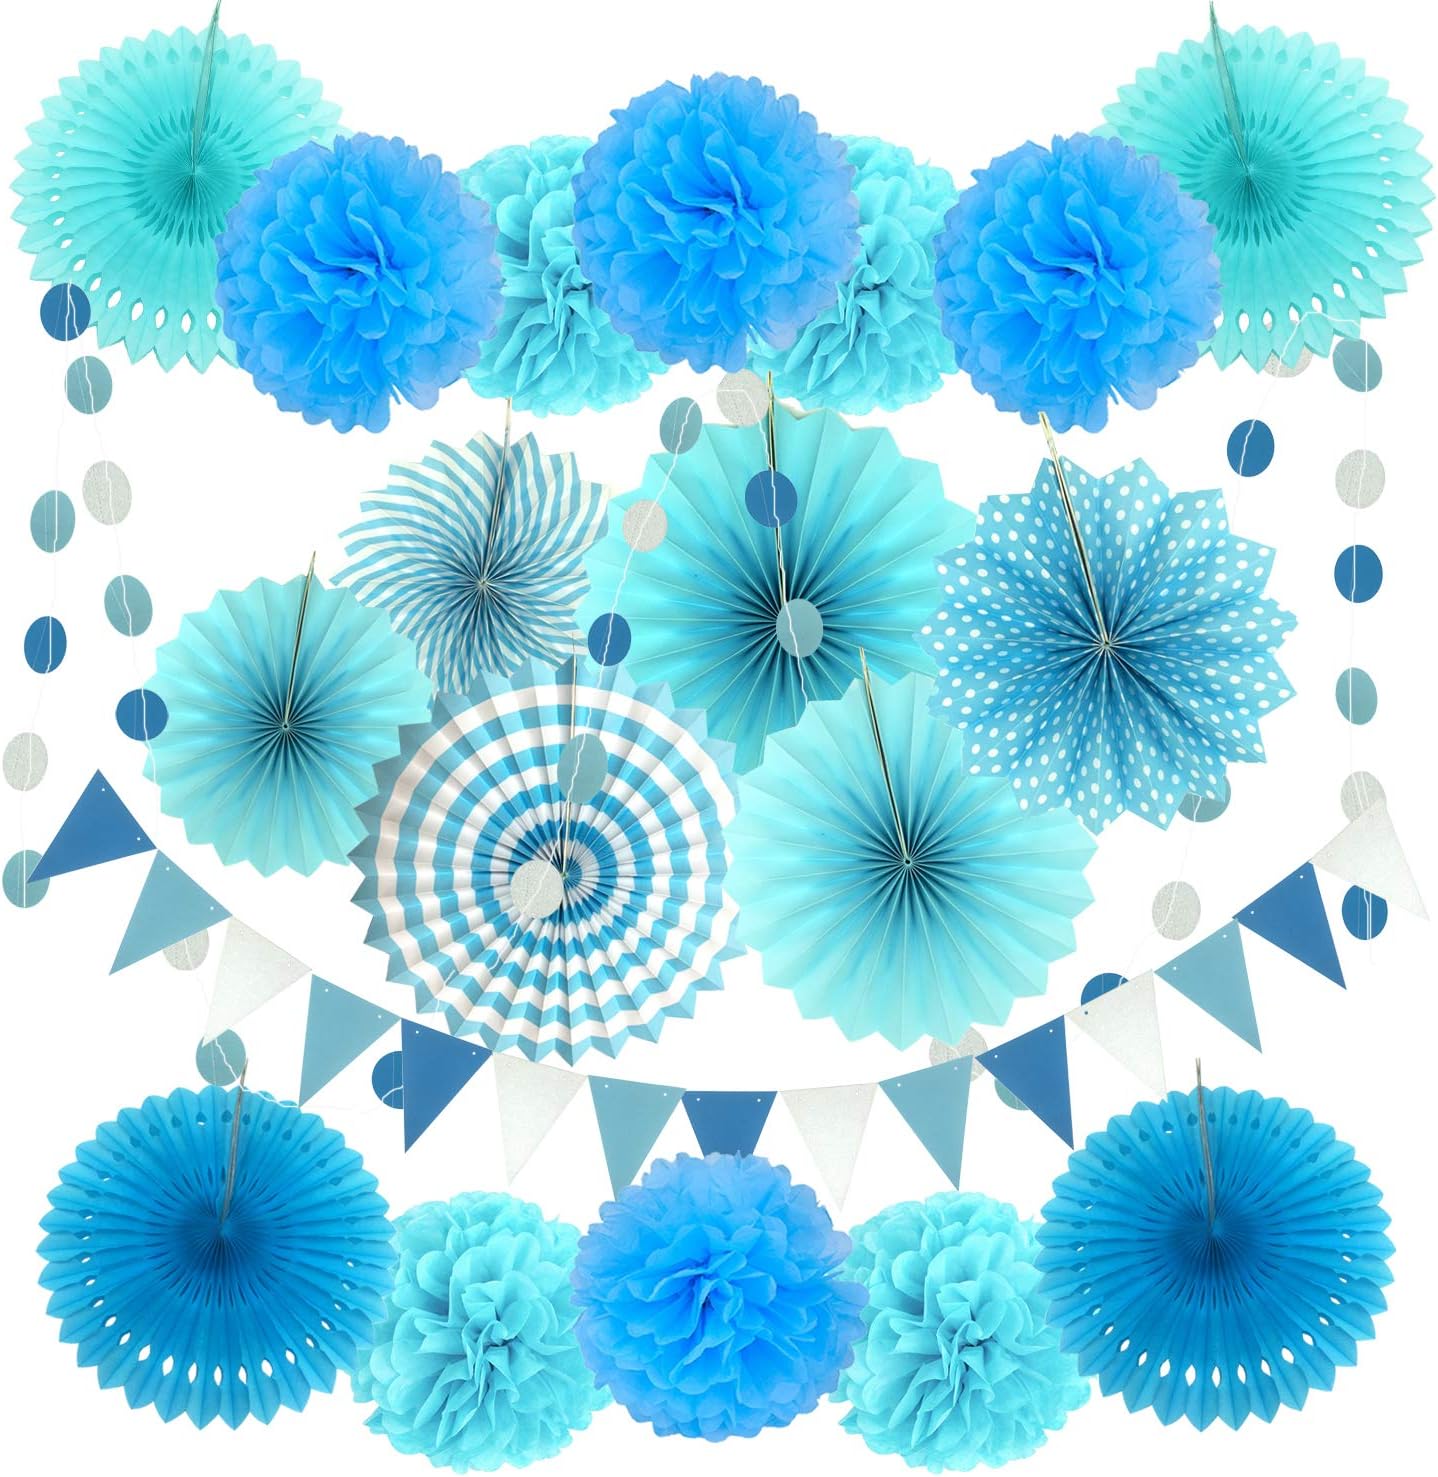 ZERODECO Party Decoration, 21 Pcs Blue Hanging Paper Fans, Pom Poms Flowers, Garlands String Polka Dot and Triangle Bunting Flags for Boy Birthday Parties, Bridal Showers, Baby Showers, Wedding